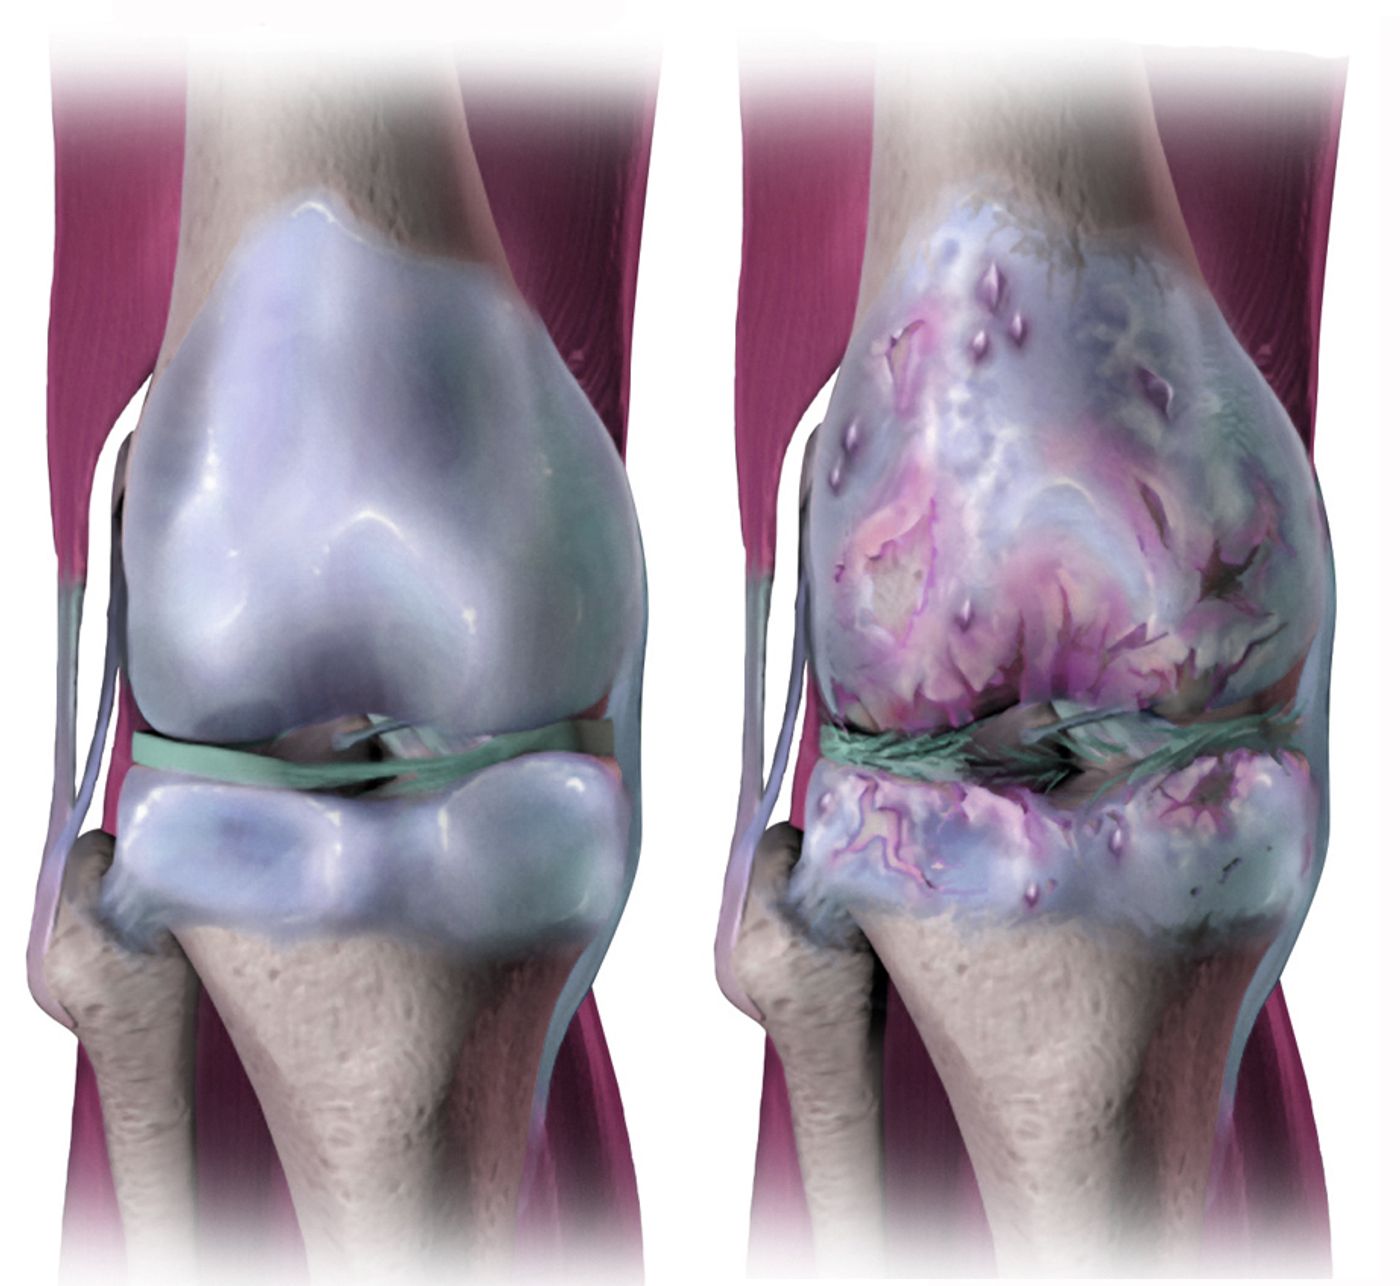 A rendering of a joint affected by osteoarthritis. Credit: Bruce Blaus